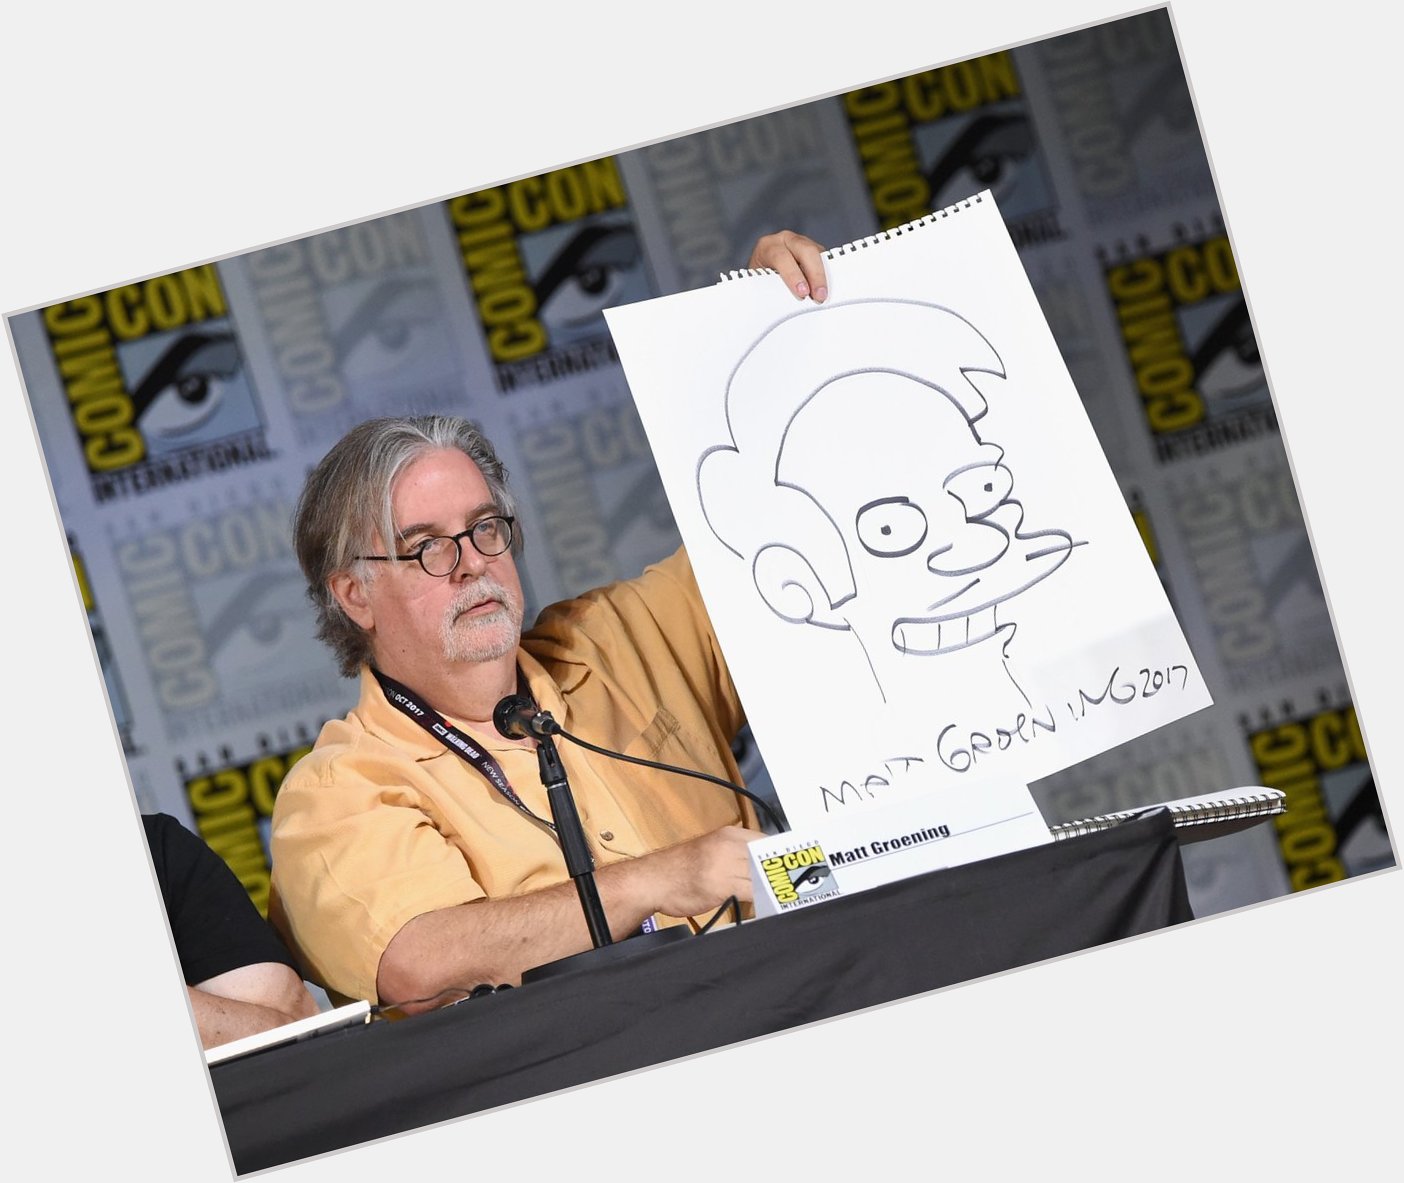 Happy Birthday Matt Groening! Thanks for all the laughs & remarkable characters. 